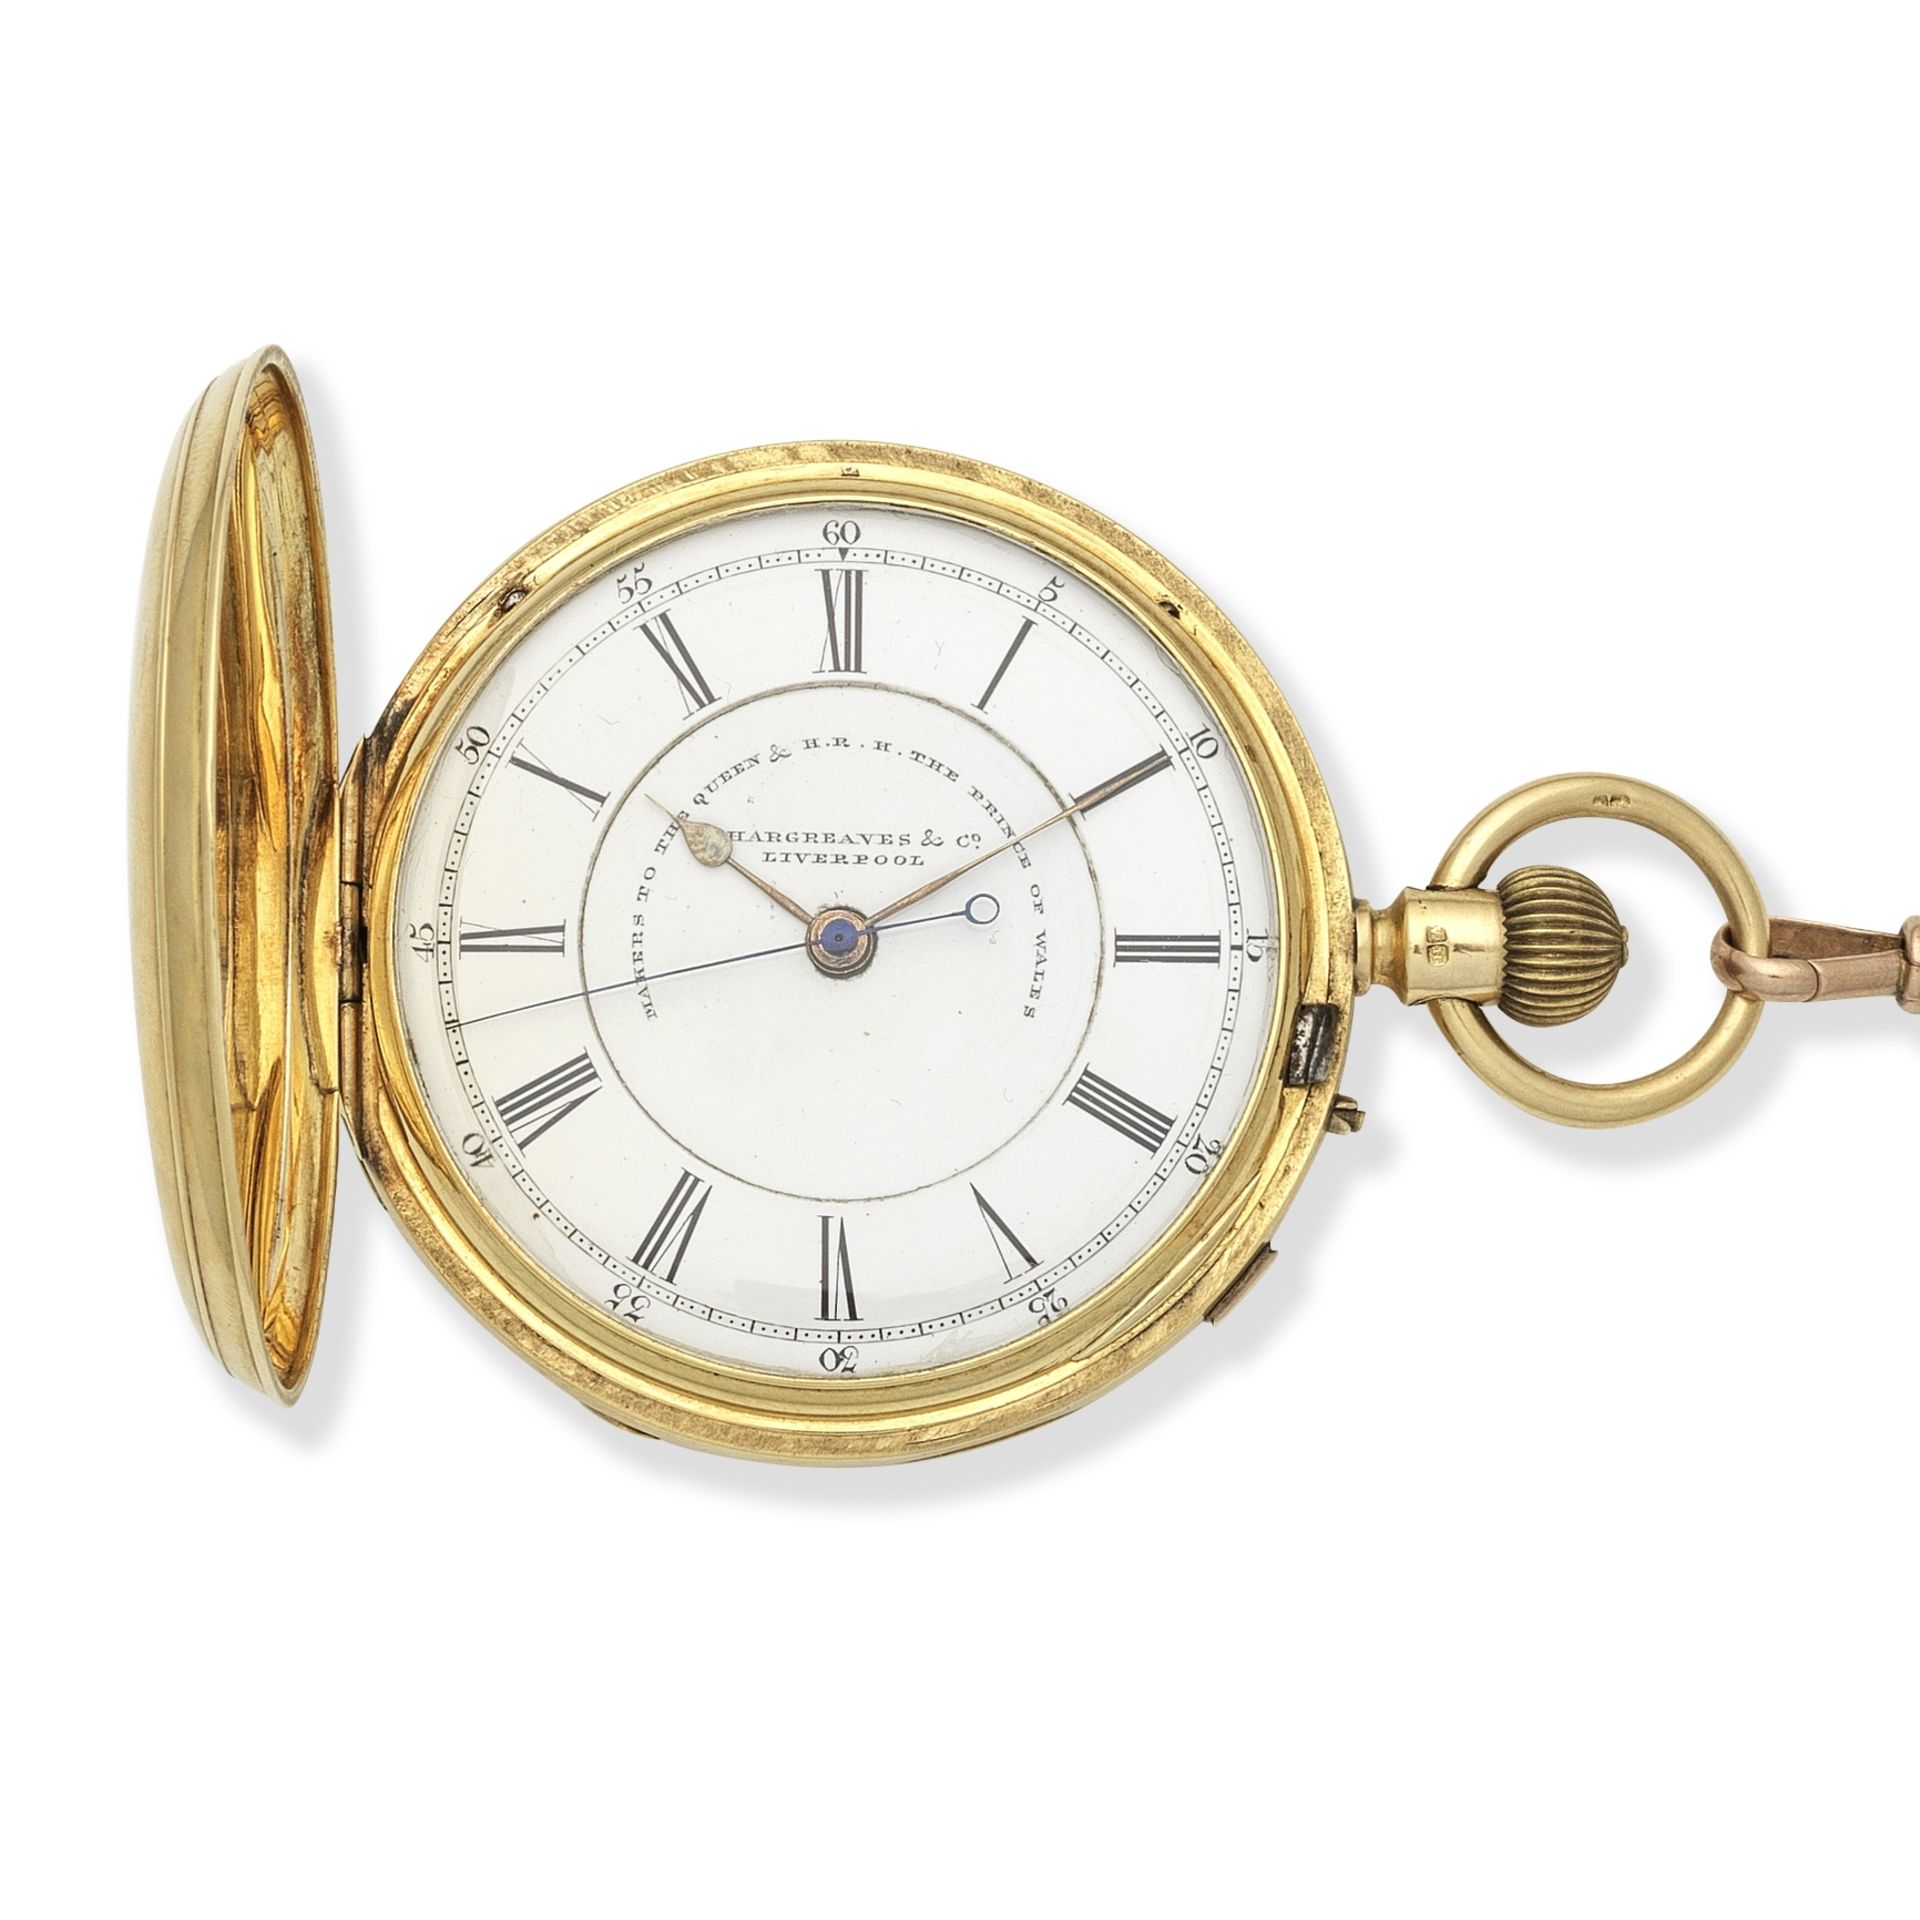 J. Hargreaves & Co, Liverpool. An 18K gold keyless wind full hunter pocket watch with stop/start ...